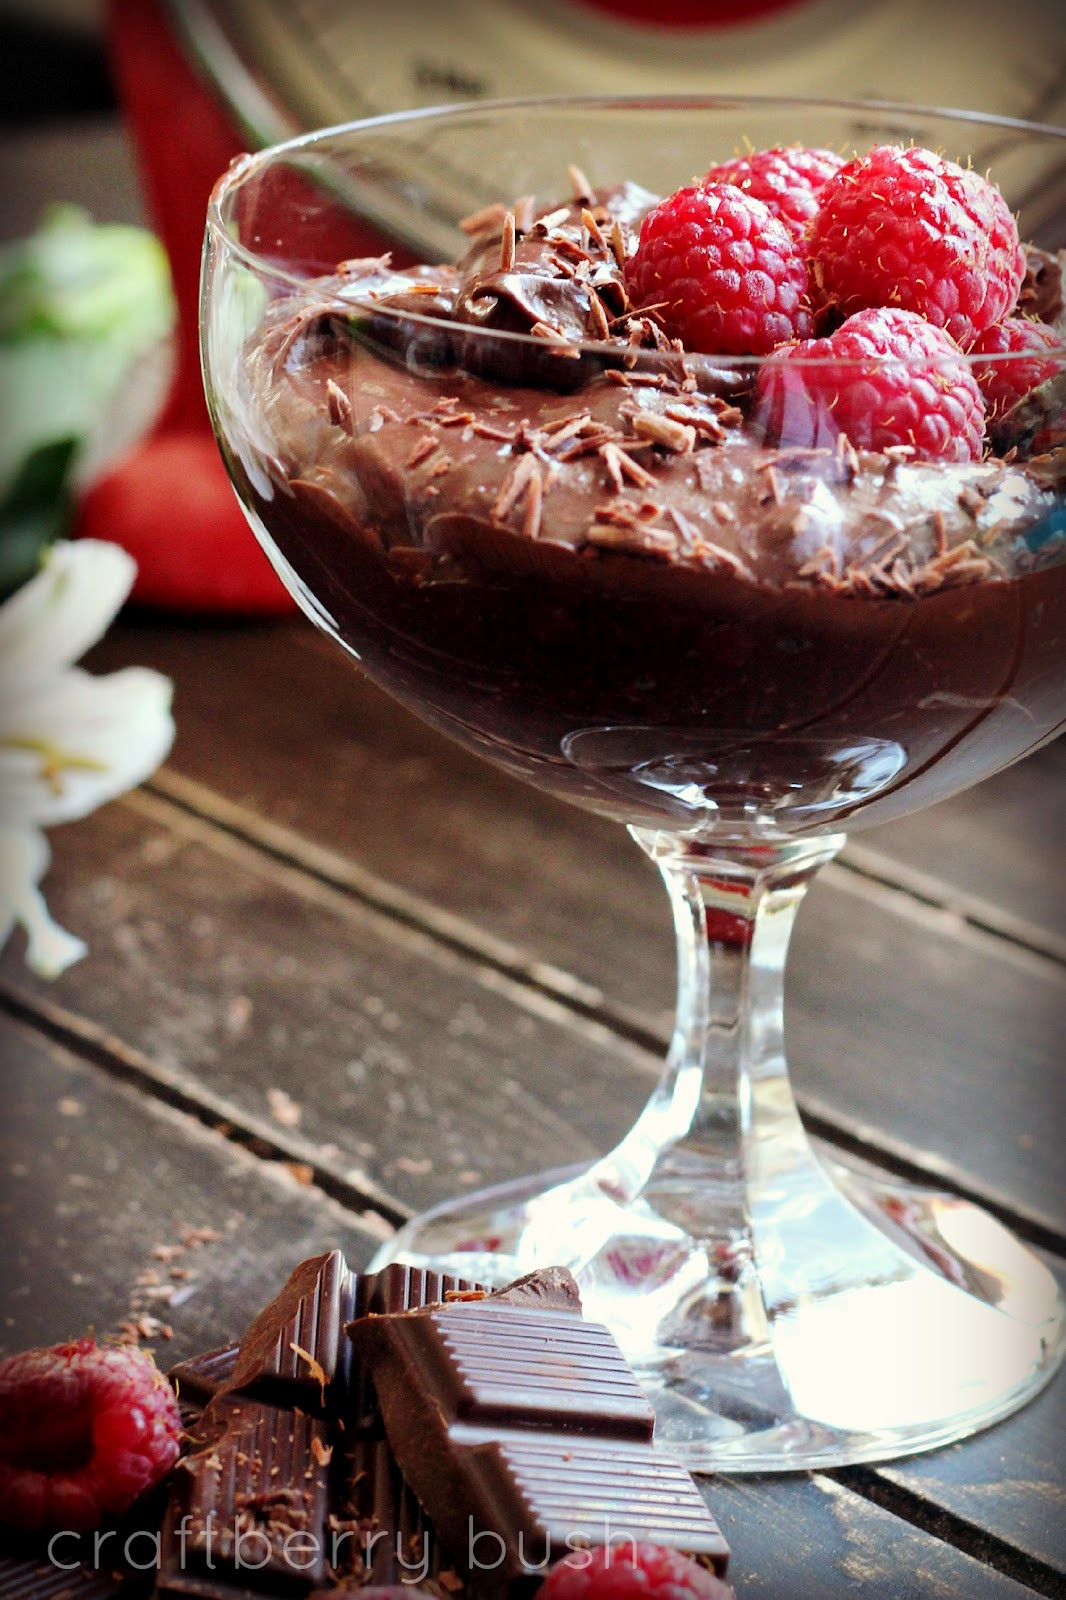 Healthy Chocolate Mousse Recipe
 Healthy chocolate mousse